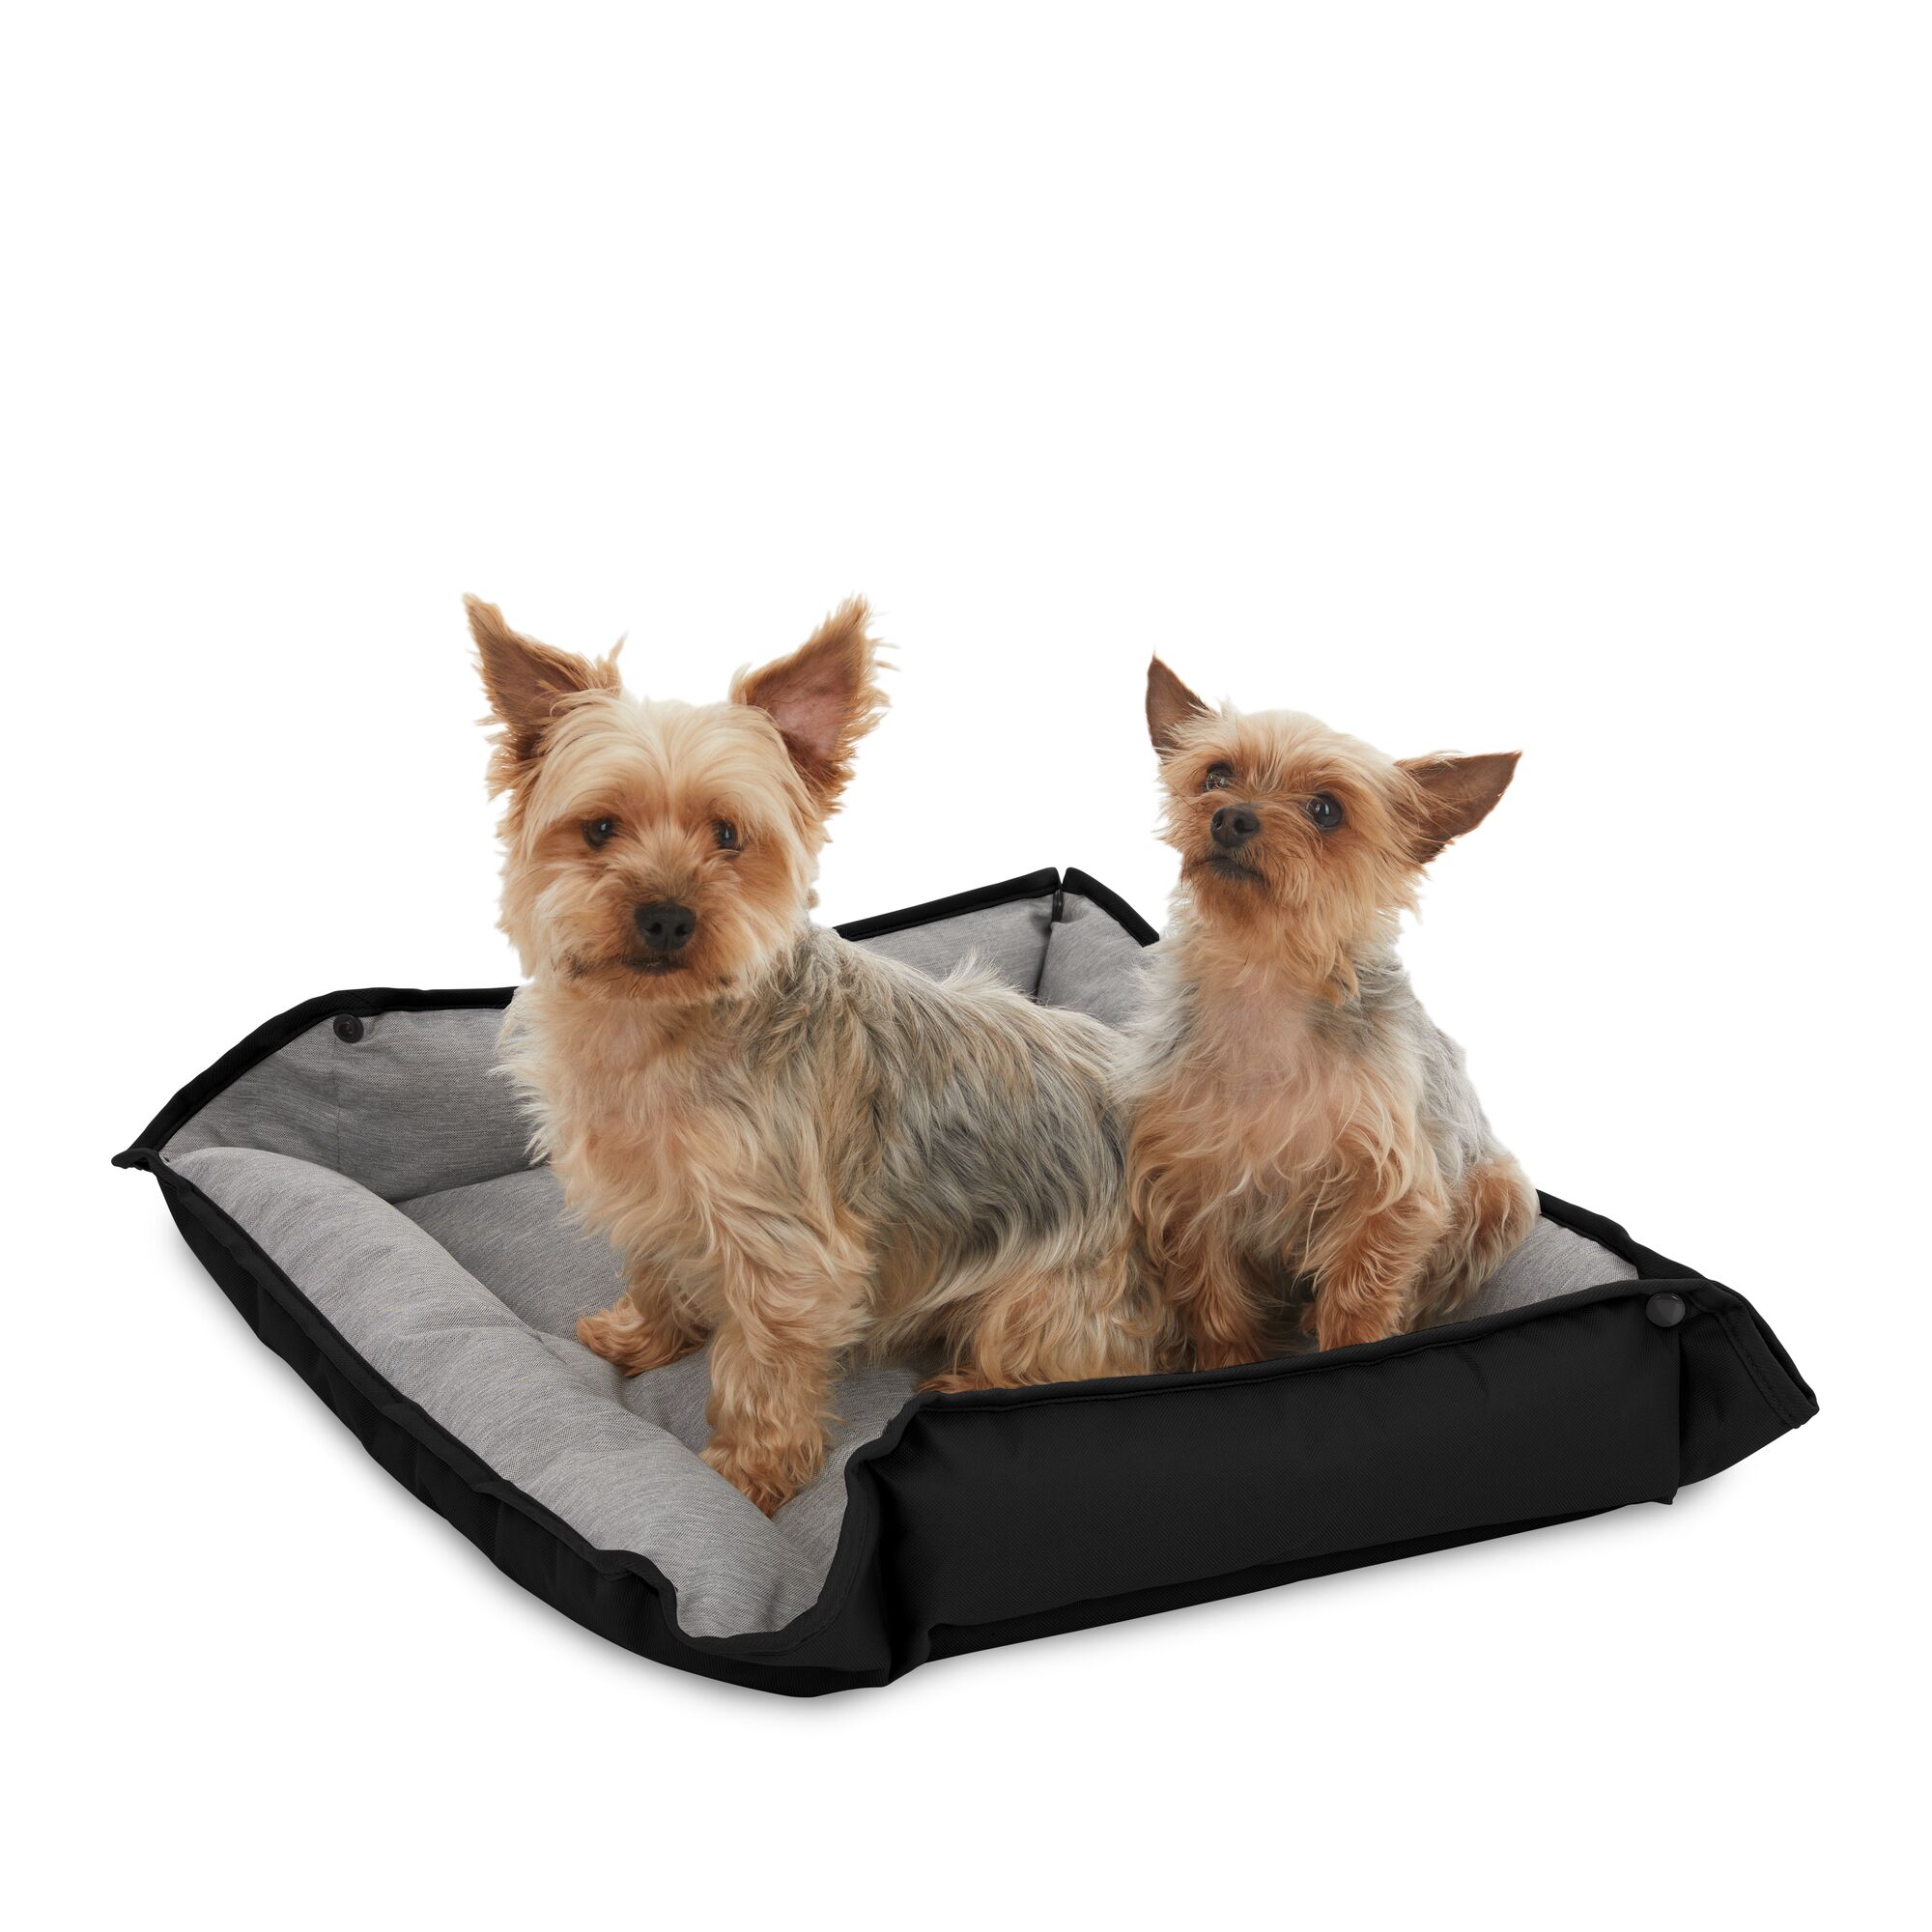 Two yorkie dogs on one black plush pet bed